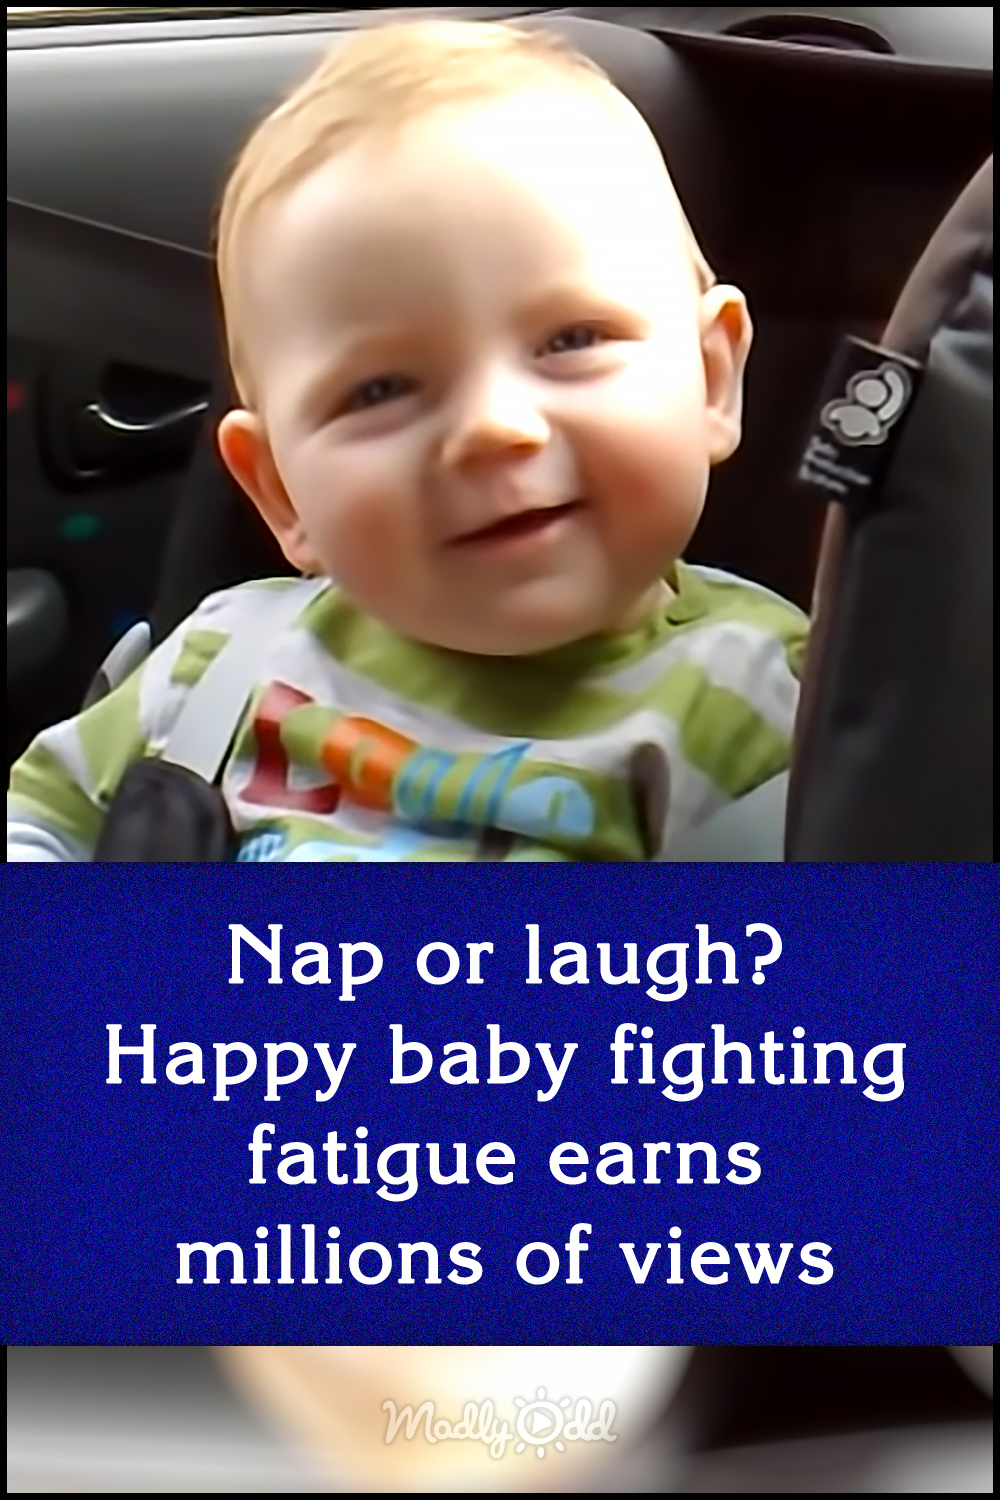 Nap or laugh? Happy baby fighting fatigue earns millions of views